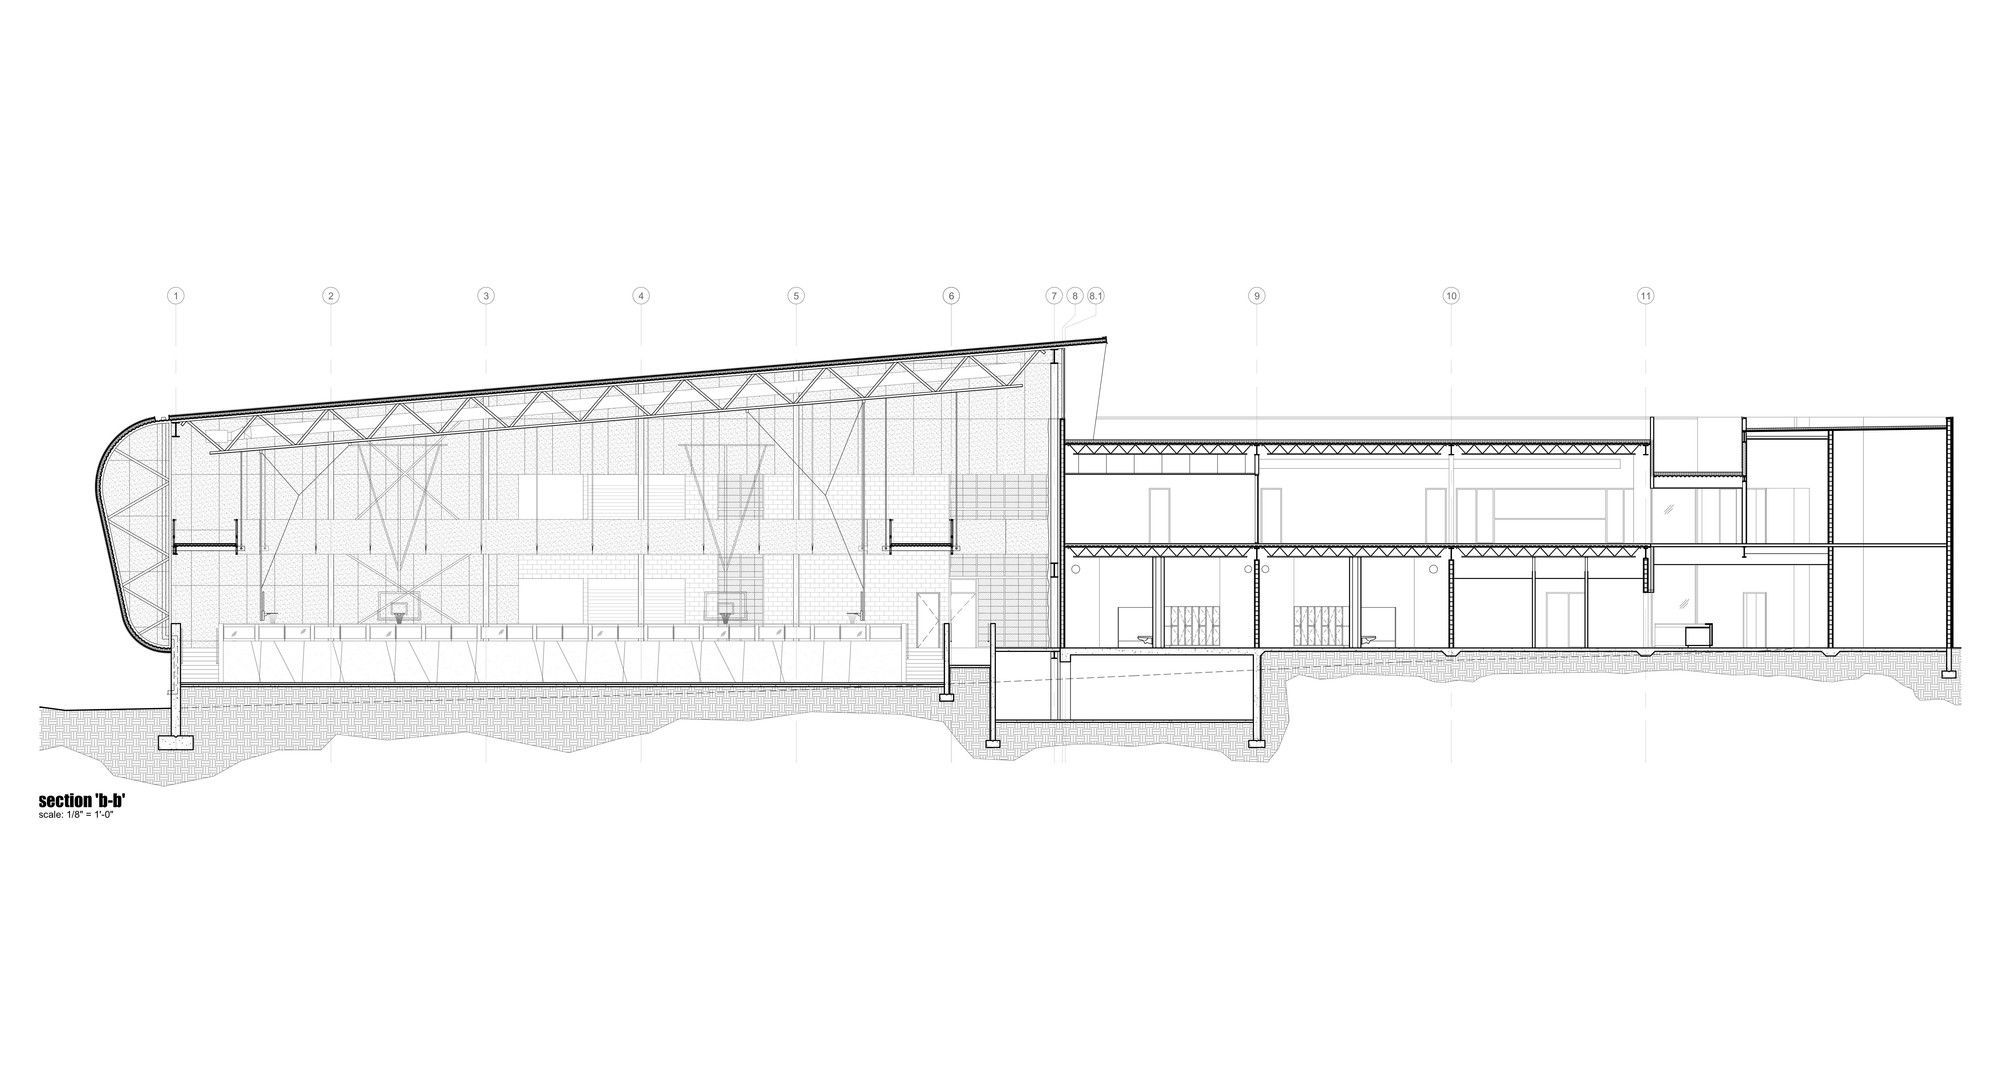 Gallery of Sport and Fitness Center for Disabled People / Baldinger Architectural Studio  - 24 -   14 fitness Center facade ideas